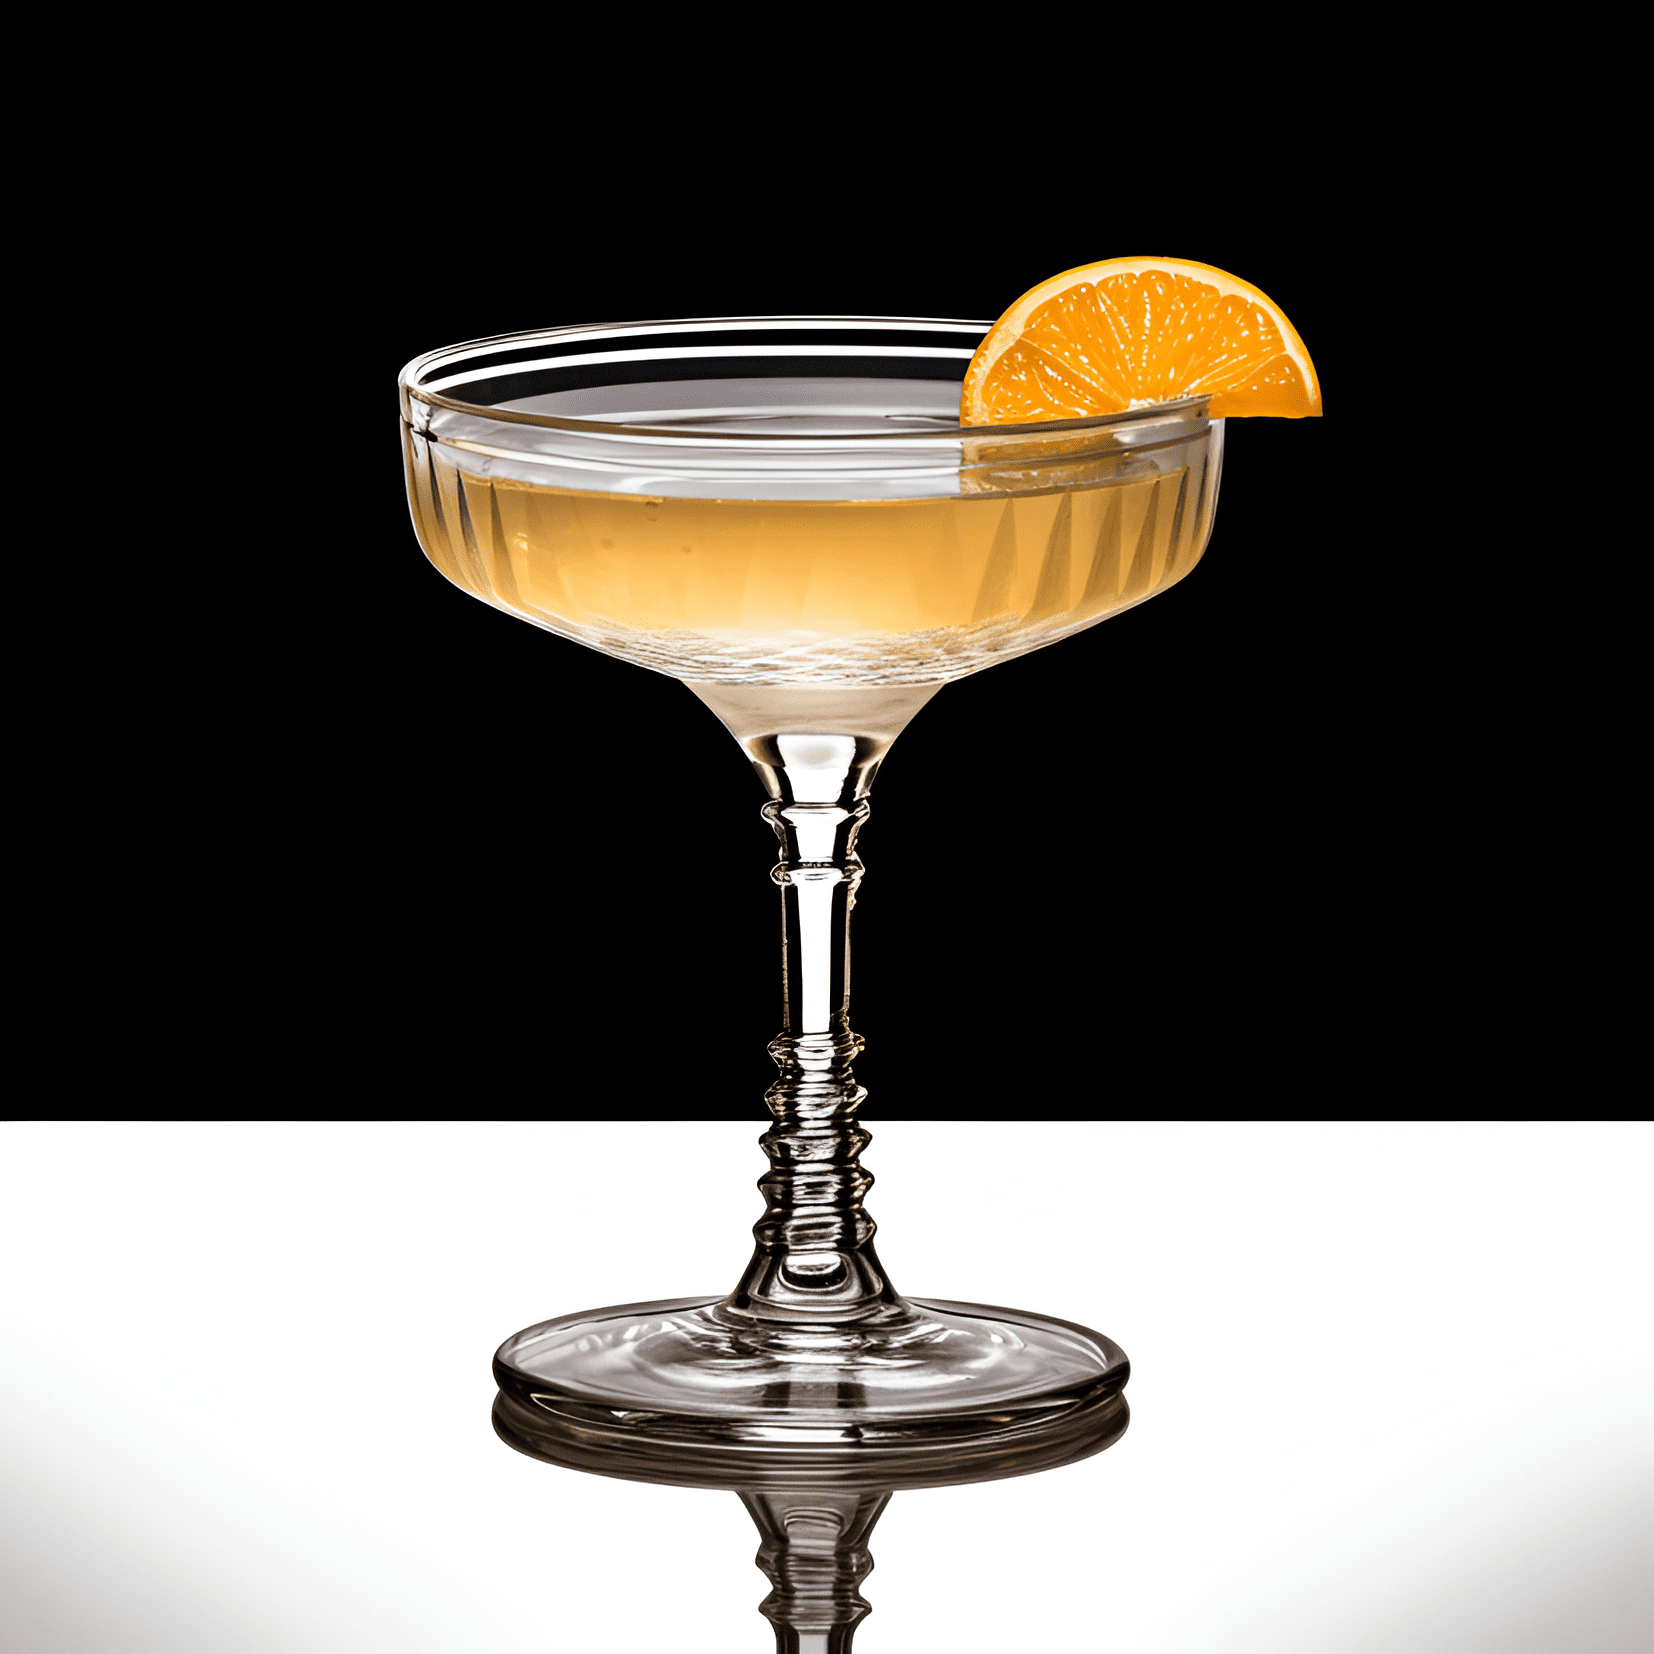 Park Avenue Cocktail Recipe - The Park Avenue cocktail has a well-balanced, fruity, and slightly sweet taste. It is refreshing, smooth, and has a hint of citrus. The combination of gin, pineapple juice, and orange curaçao creates a delightful and sophisticated flavor profile.